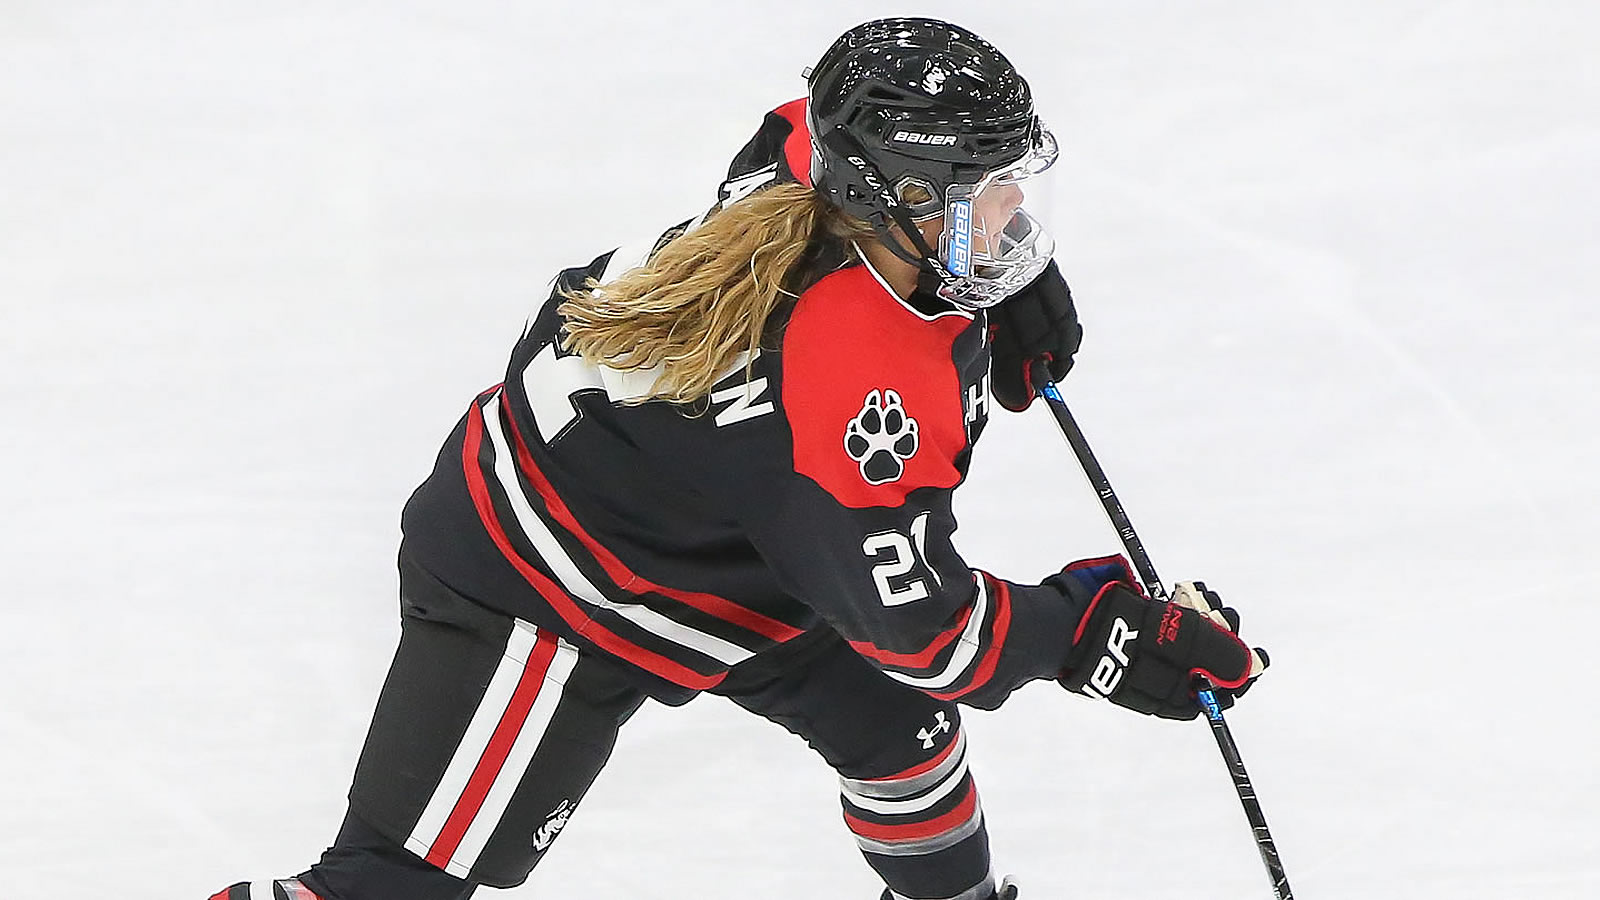 NWHL: Boston Pride win 2021 Isobel Cup, Become 1st Team With 2 Titles